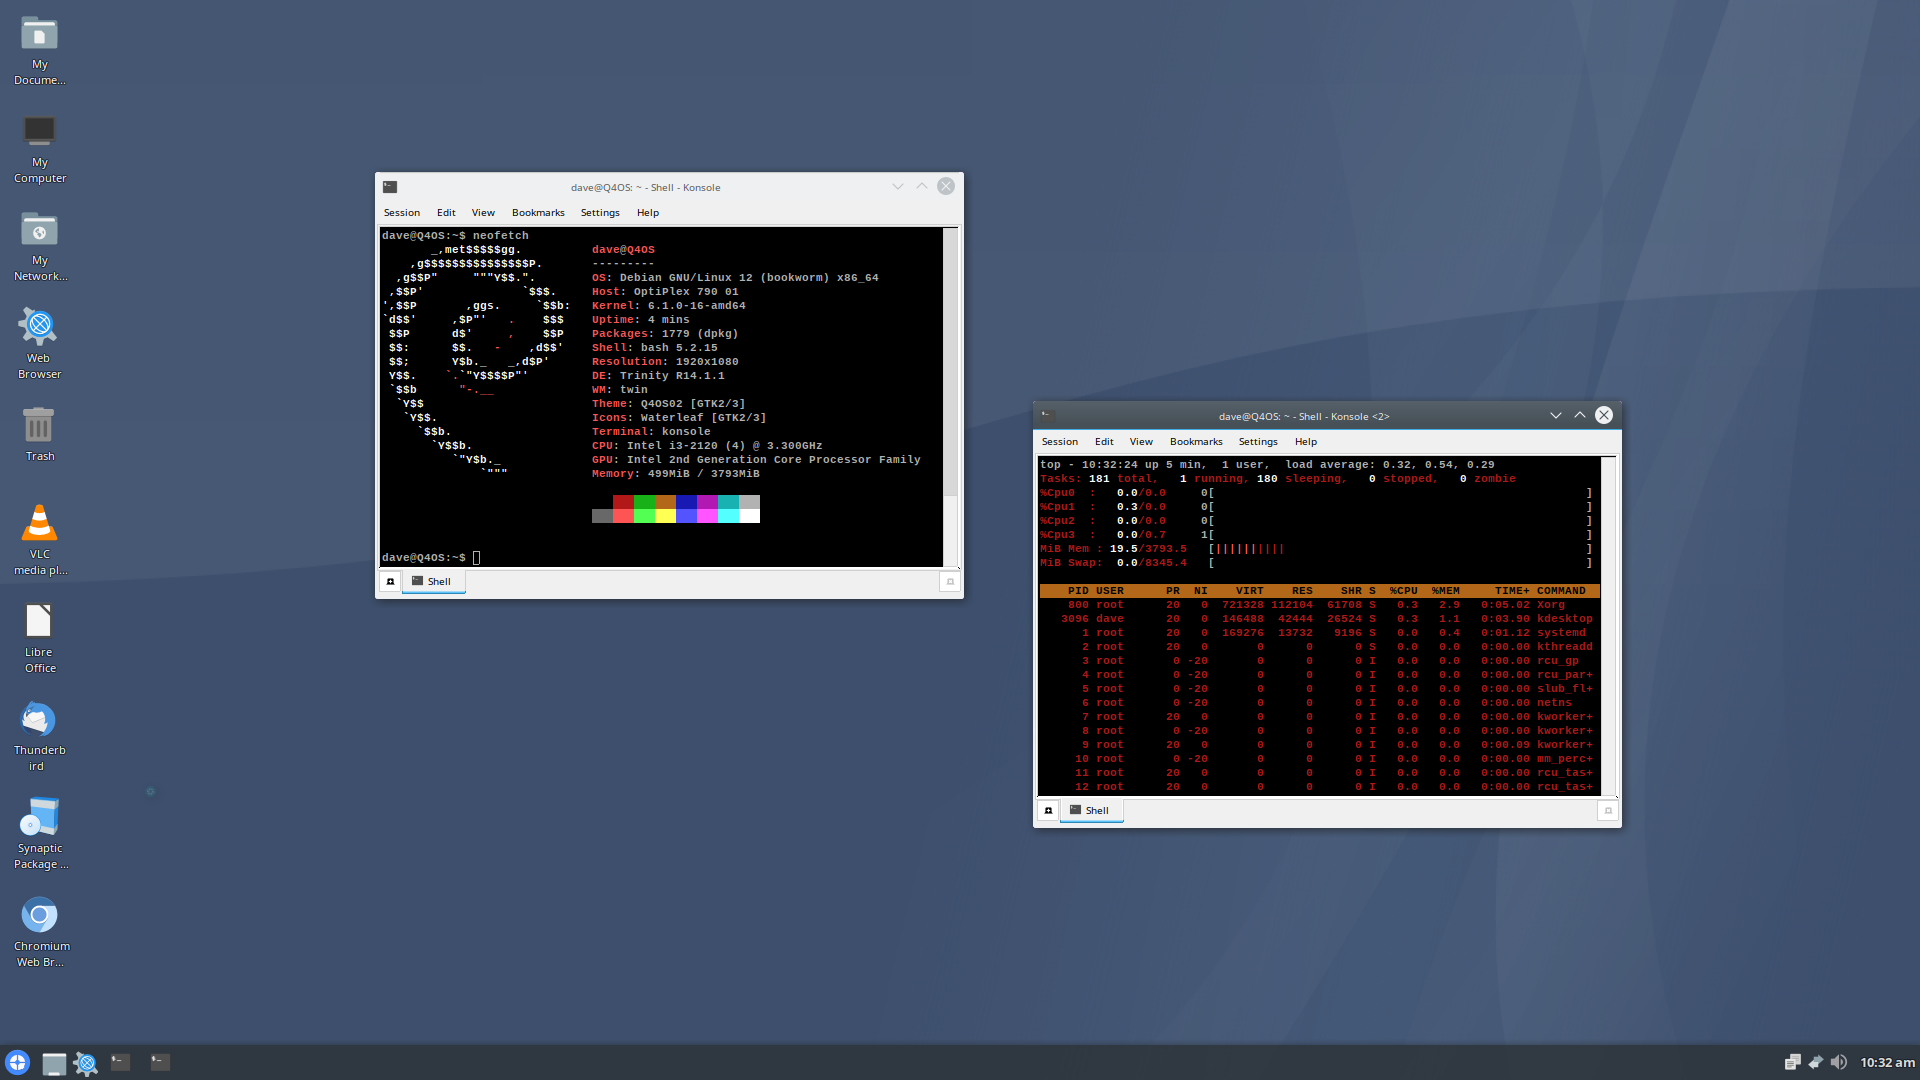 The Q4OS desktop with two terminals windows. One shows the output from Neofetch and the other is running top.